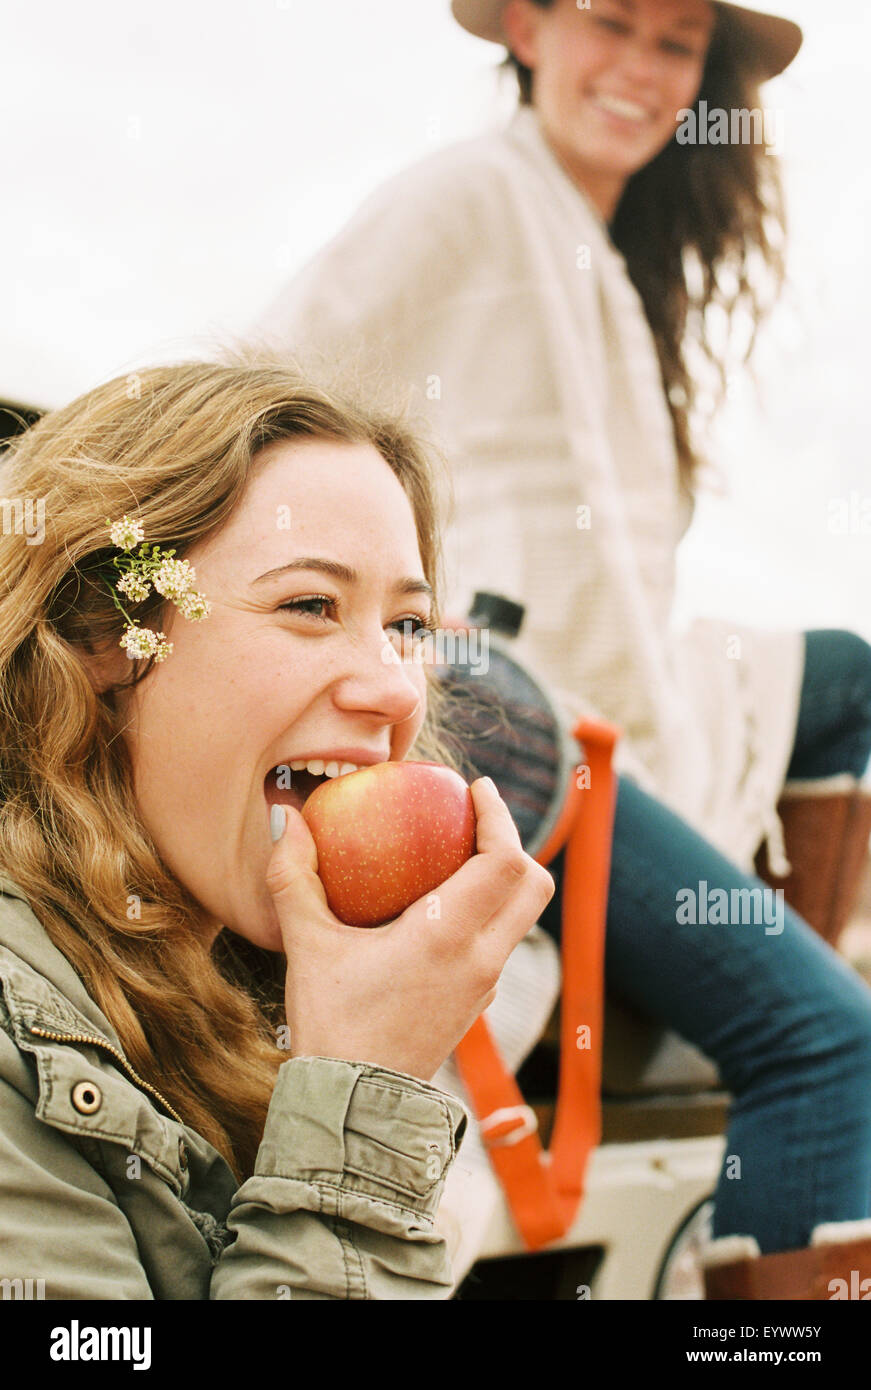 Two young women, one biting into an apple. Stock Photo